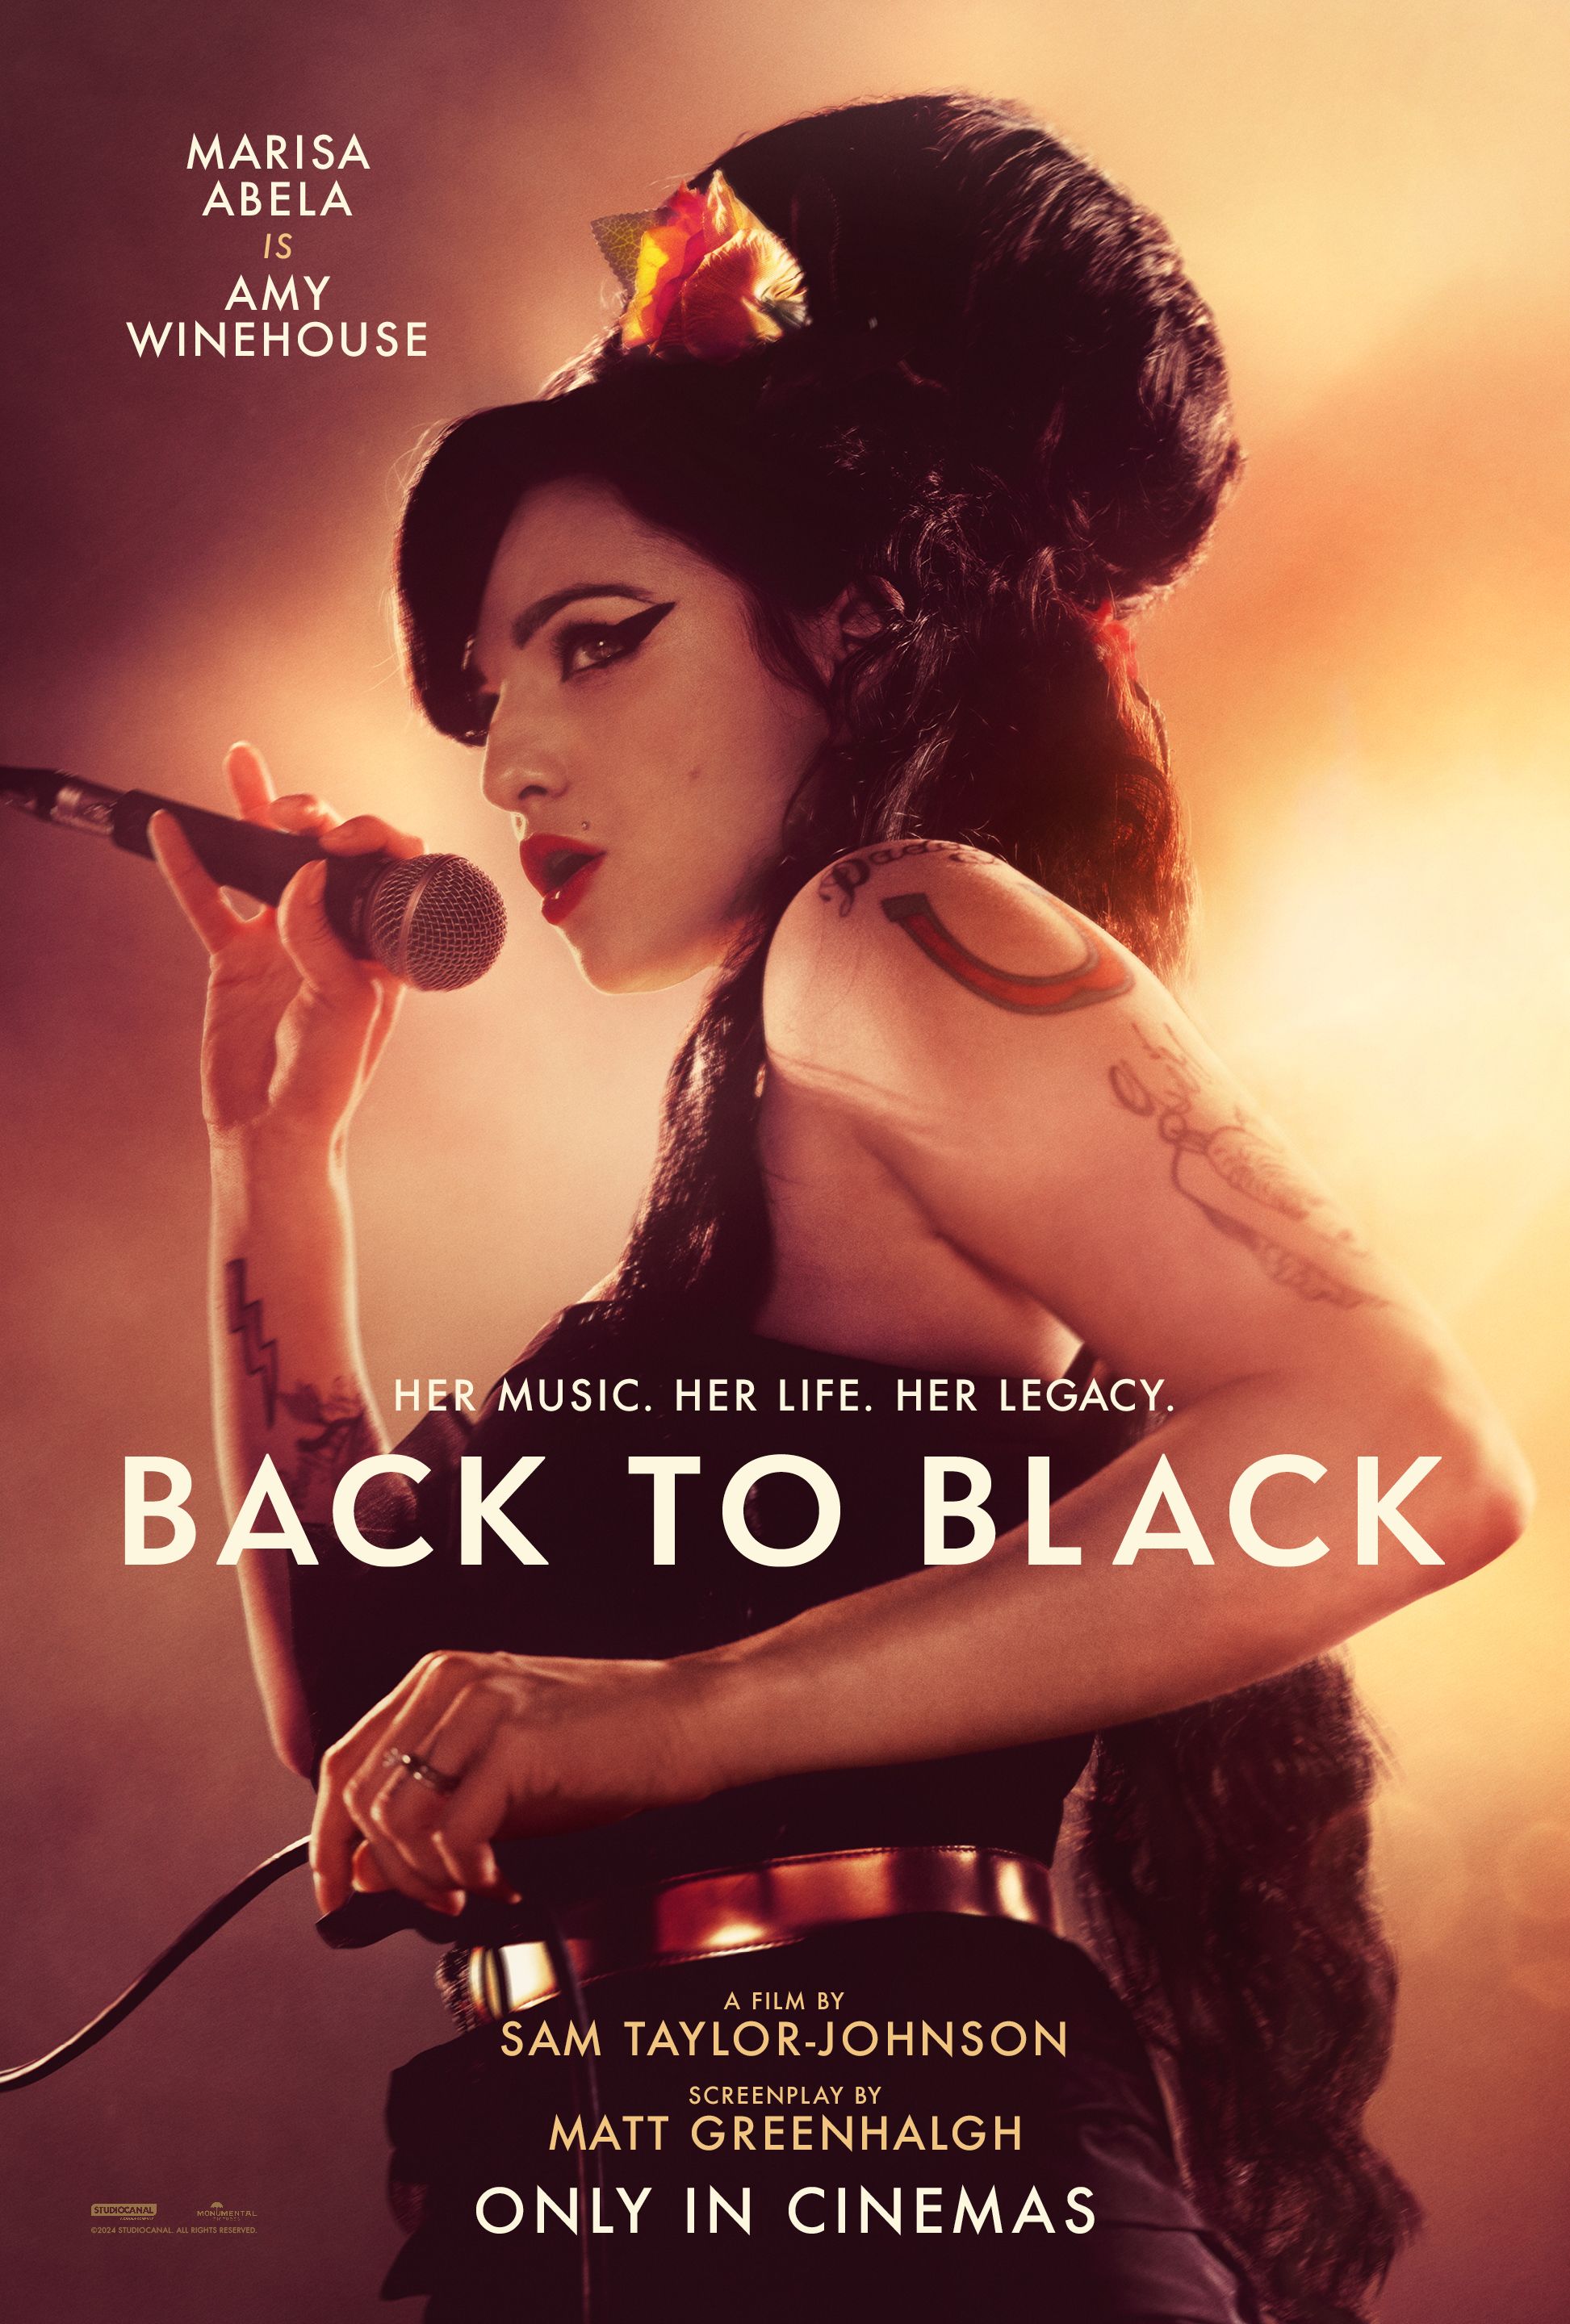 Back to Black Trailer Marisa Abela takes center stage as Amy